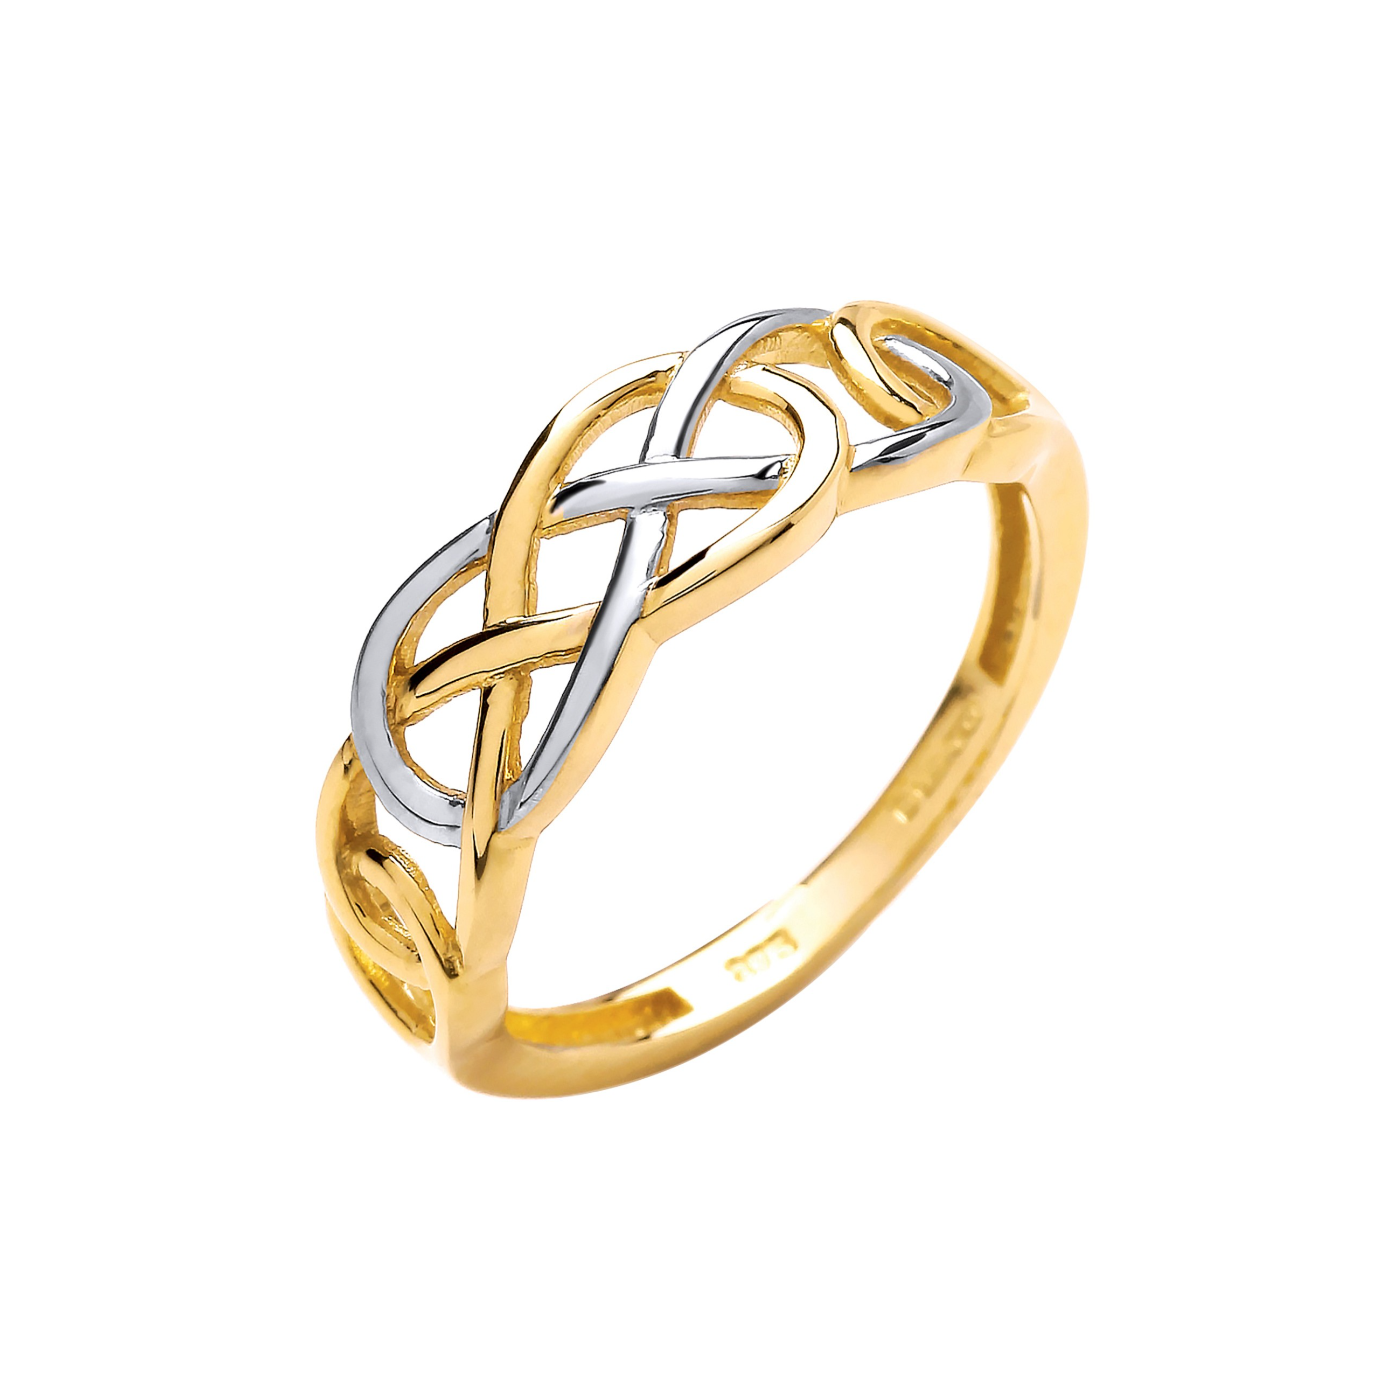 9ct Yellow and White Gold 2 Colour Celtic Ring - Robert Anthony Jewellers, Edinburgh